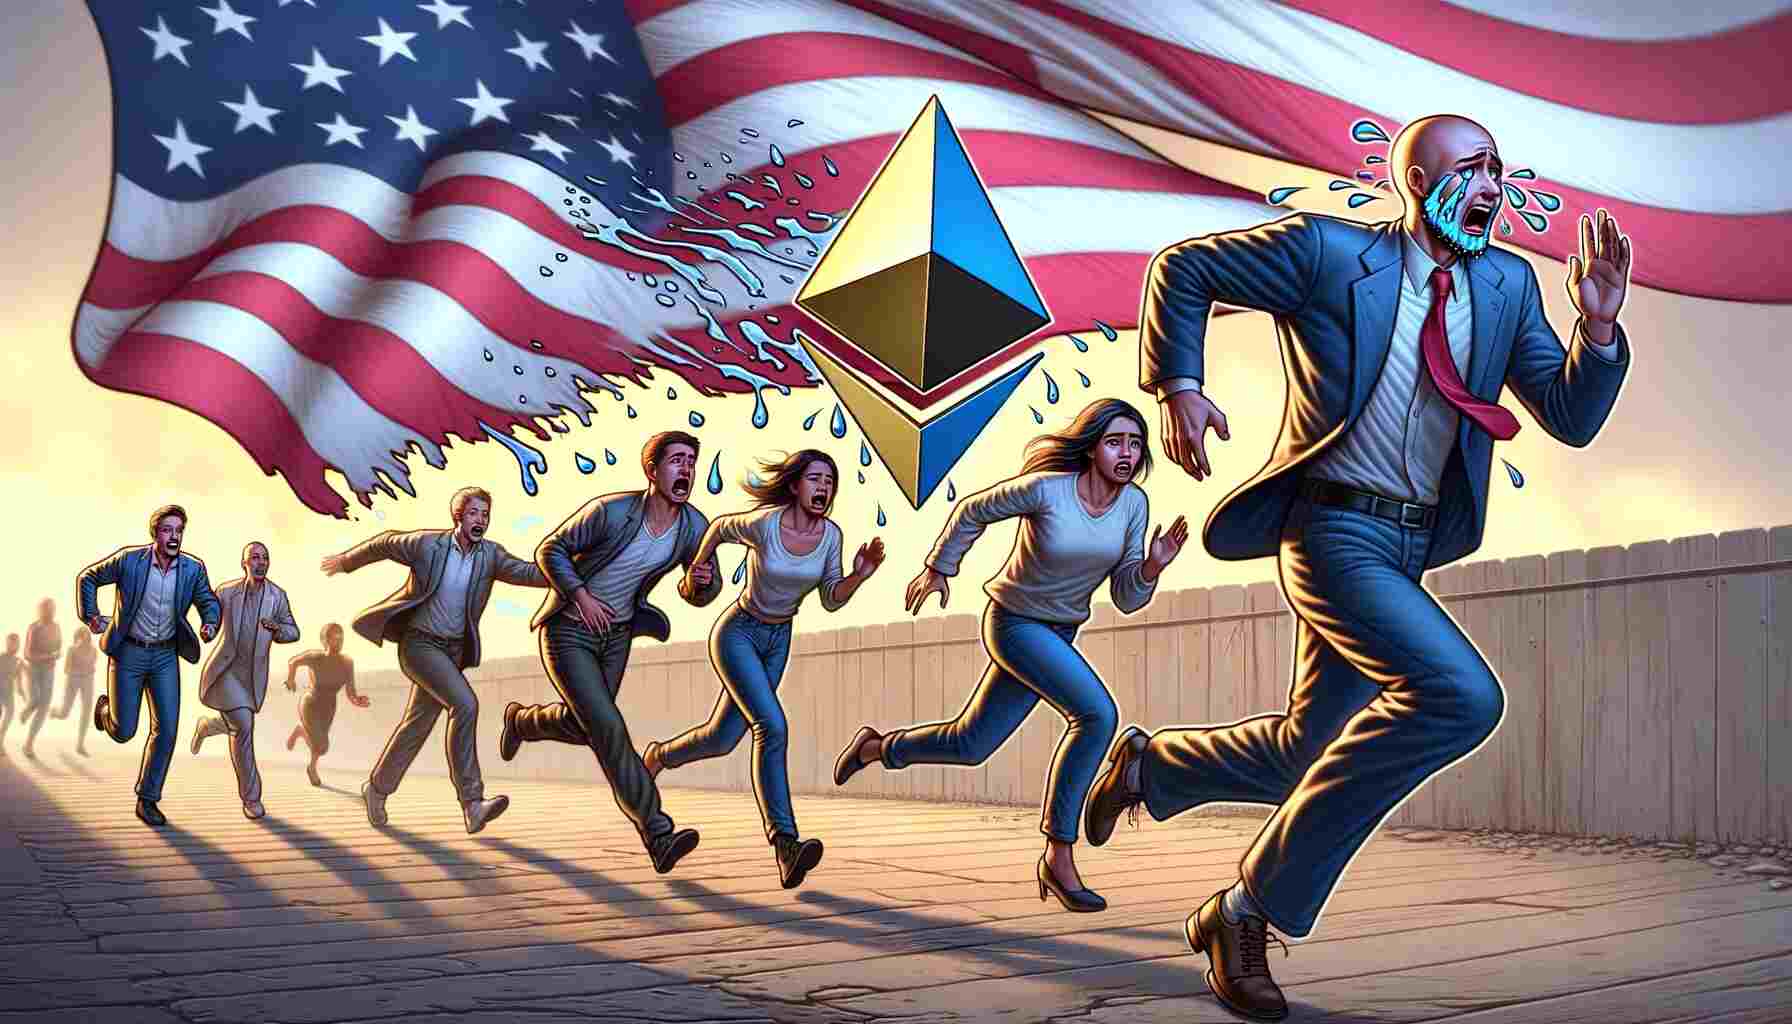 Ethereum: U.S. investors look for other altcoins as ETH’s price falls